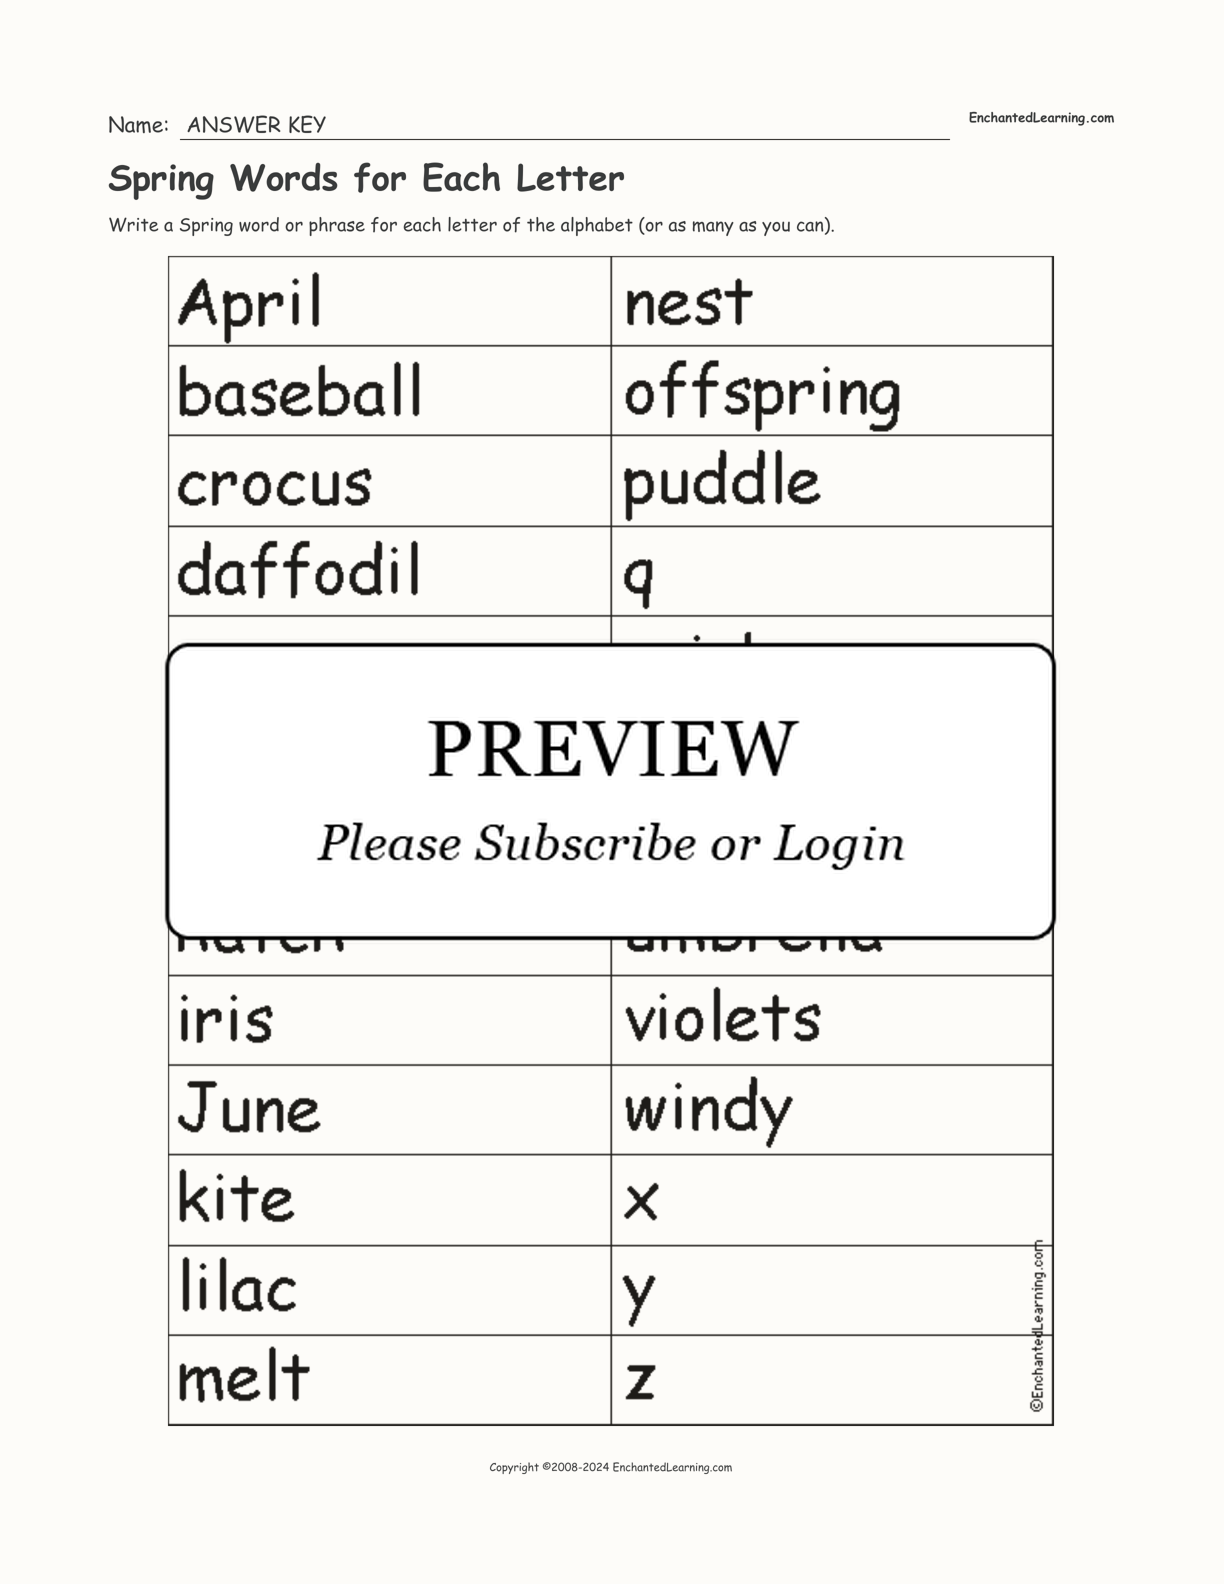 Spring Words for Each Letter interactive worksheet page 2